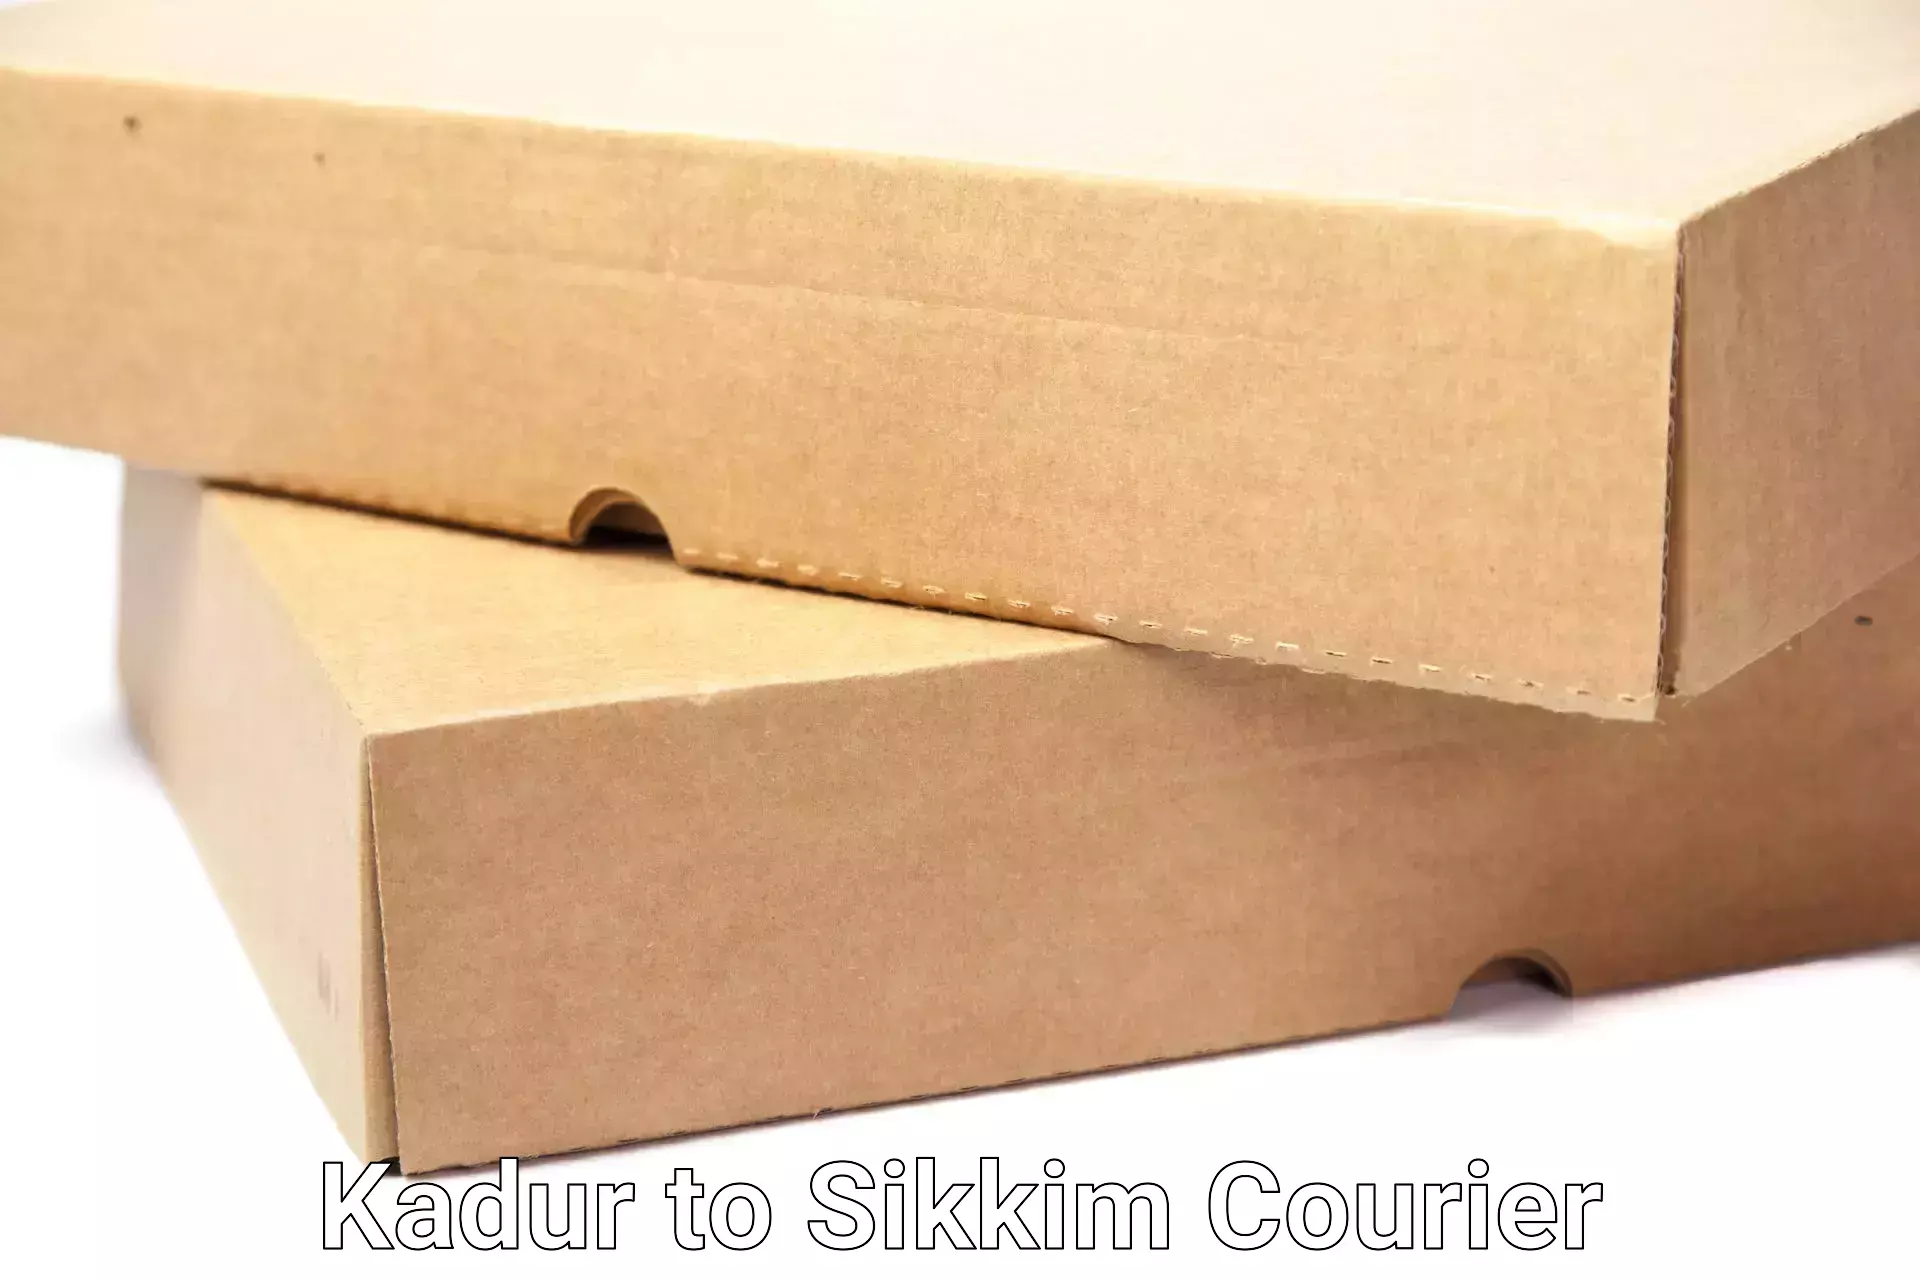 Moving and storage services Kadur to Sikkim